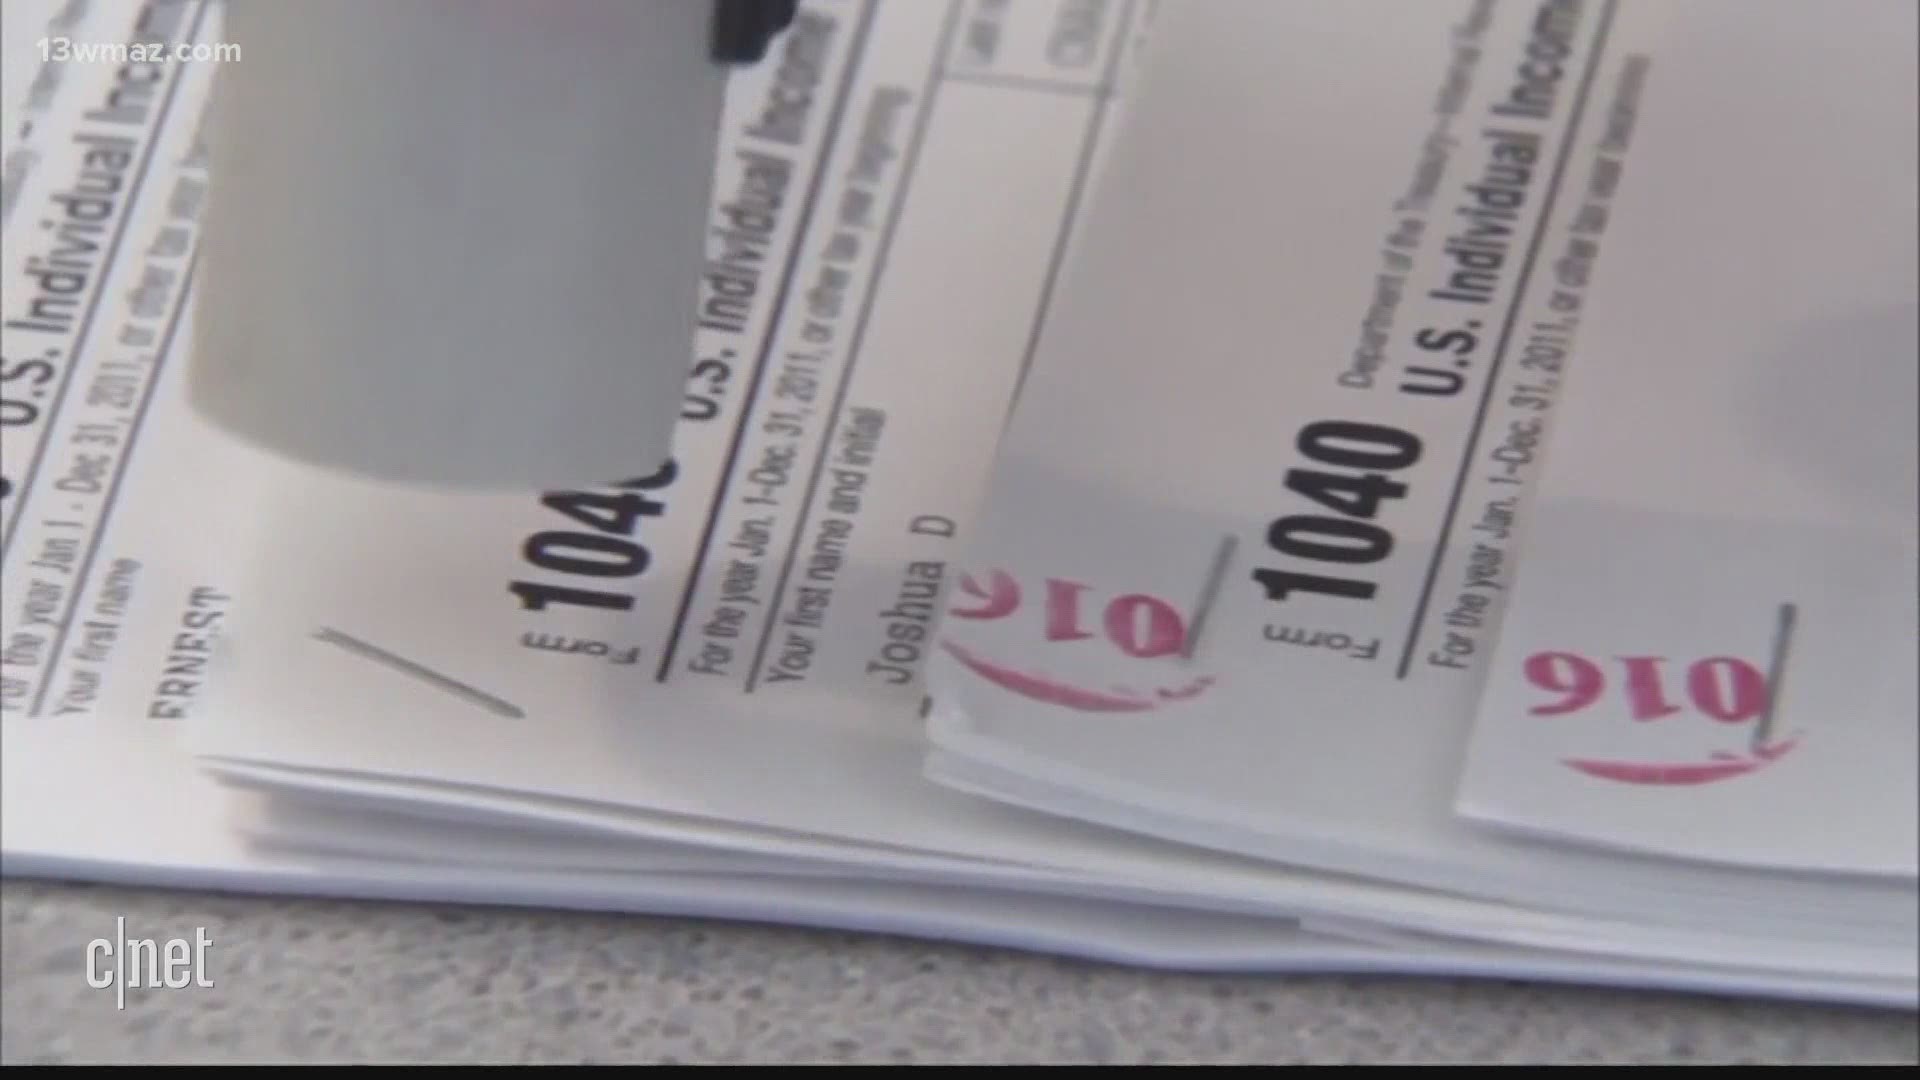 The second round of stimulus checks are making their way into checking accounts across Central Georgia, and people want to know if they're taxed.